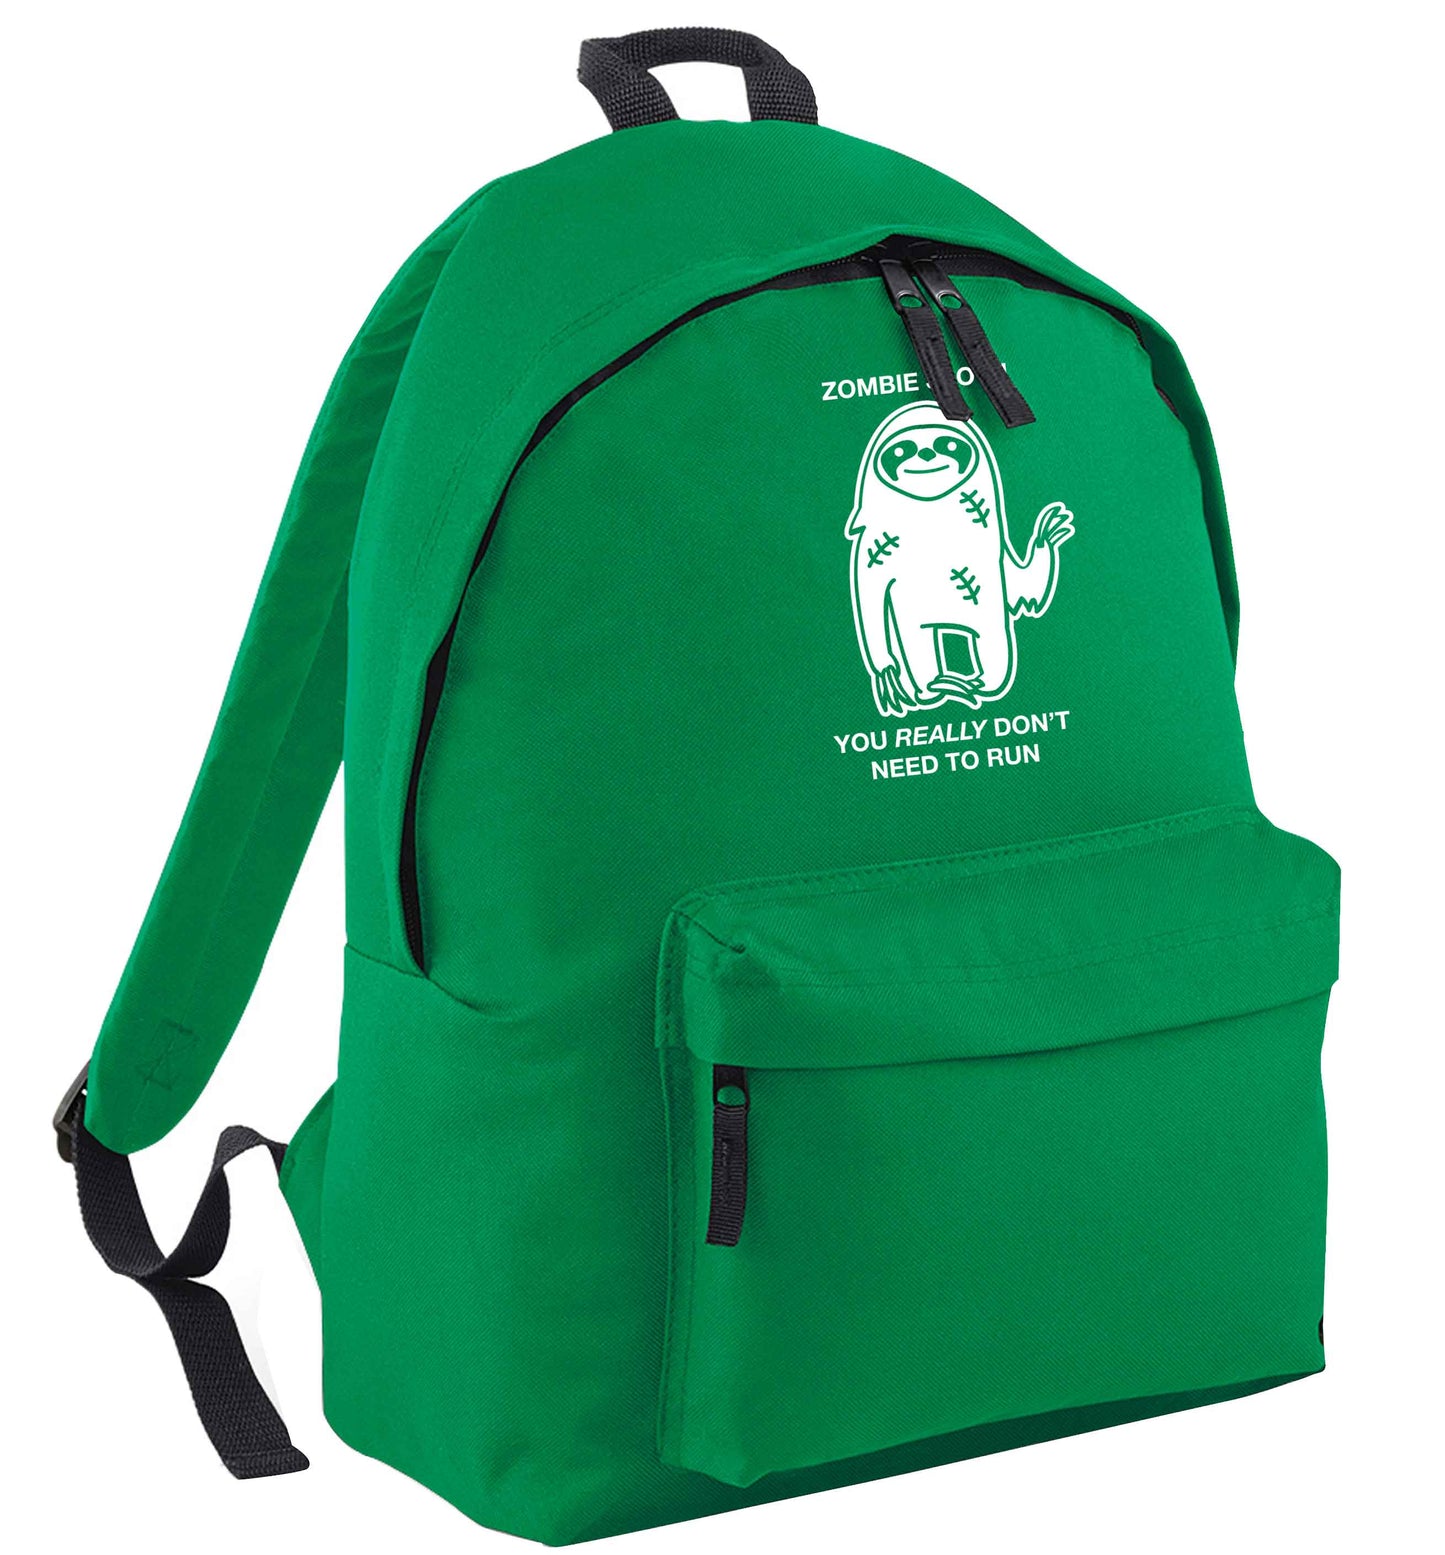 Zombie sloth you really don't need to run green adults backpack